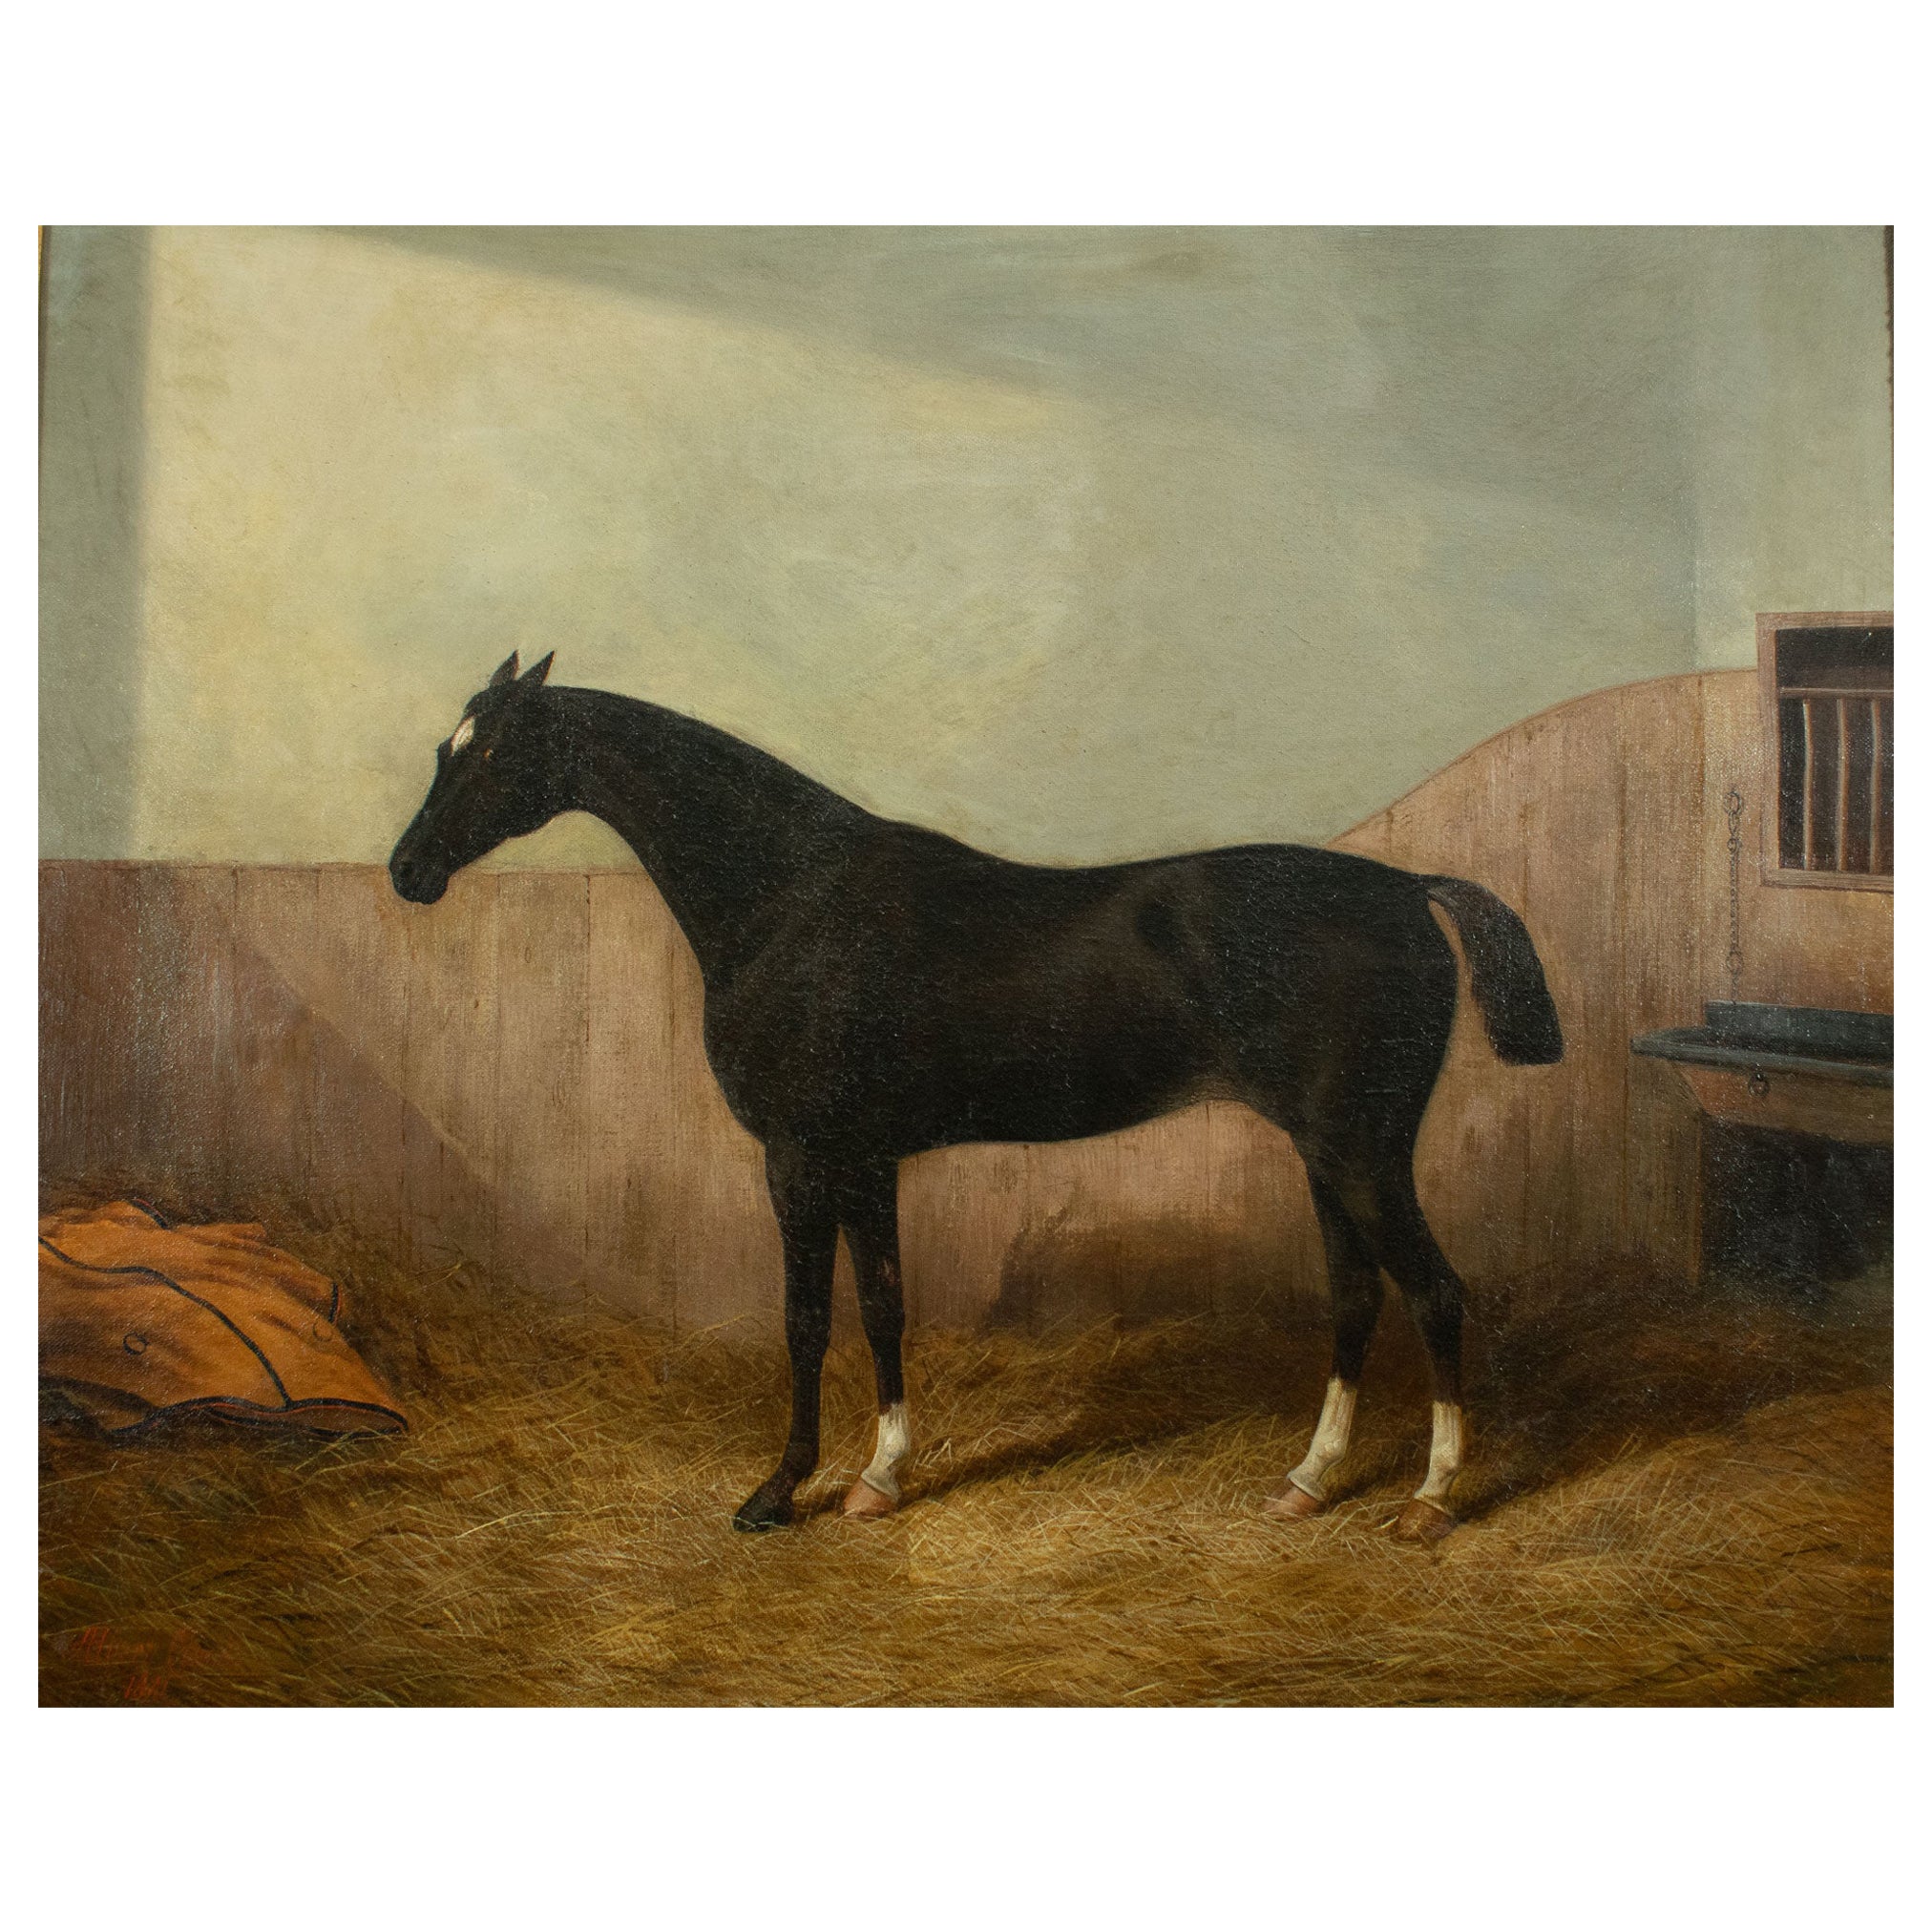 Albert James CLARK (1843-1928 British). Black horse in its stable. Original framed oil on canvas.

Signed and dated lower left Albert Clark 1881. 

Canvas size : 51 x 61 cm. Frame size : 76 x 65 cm

Albert Clark was a highly productive painter